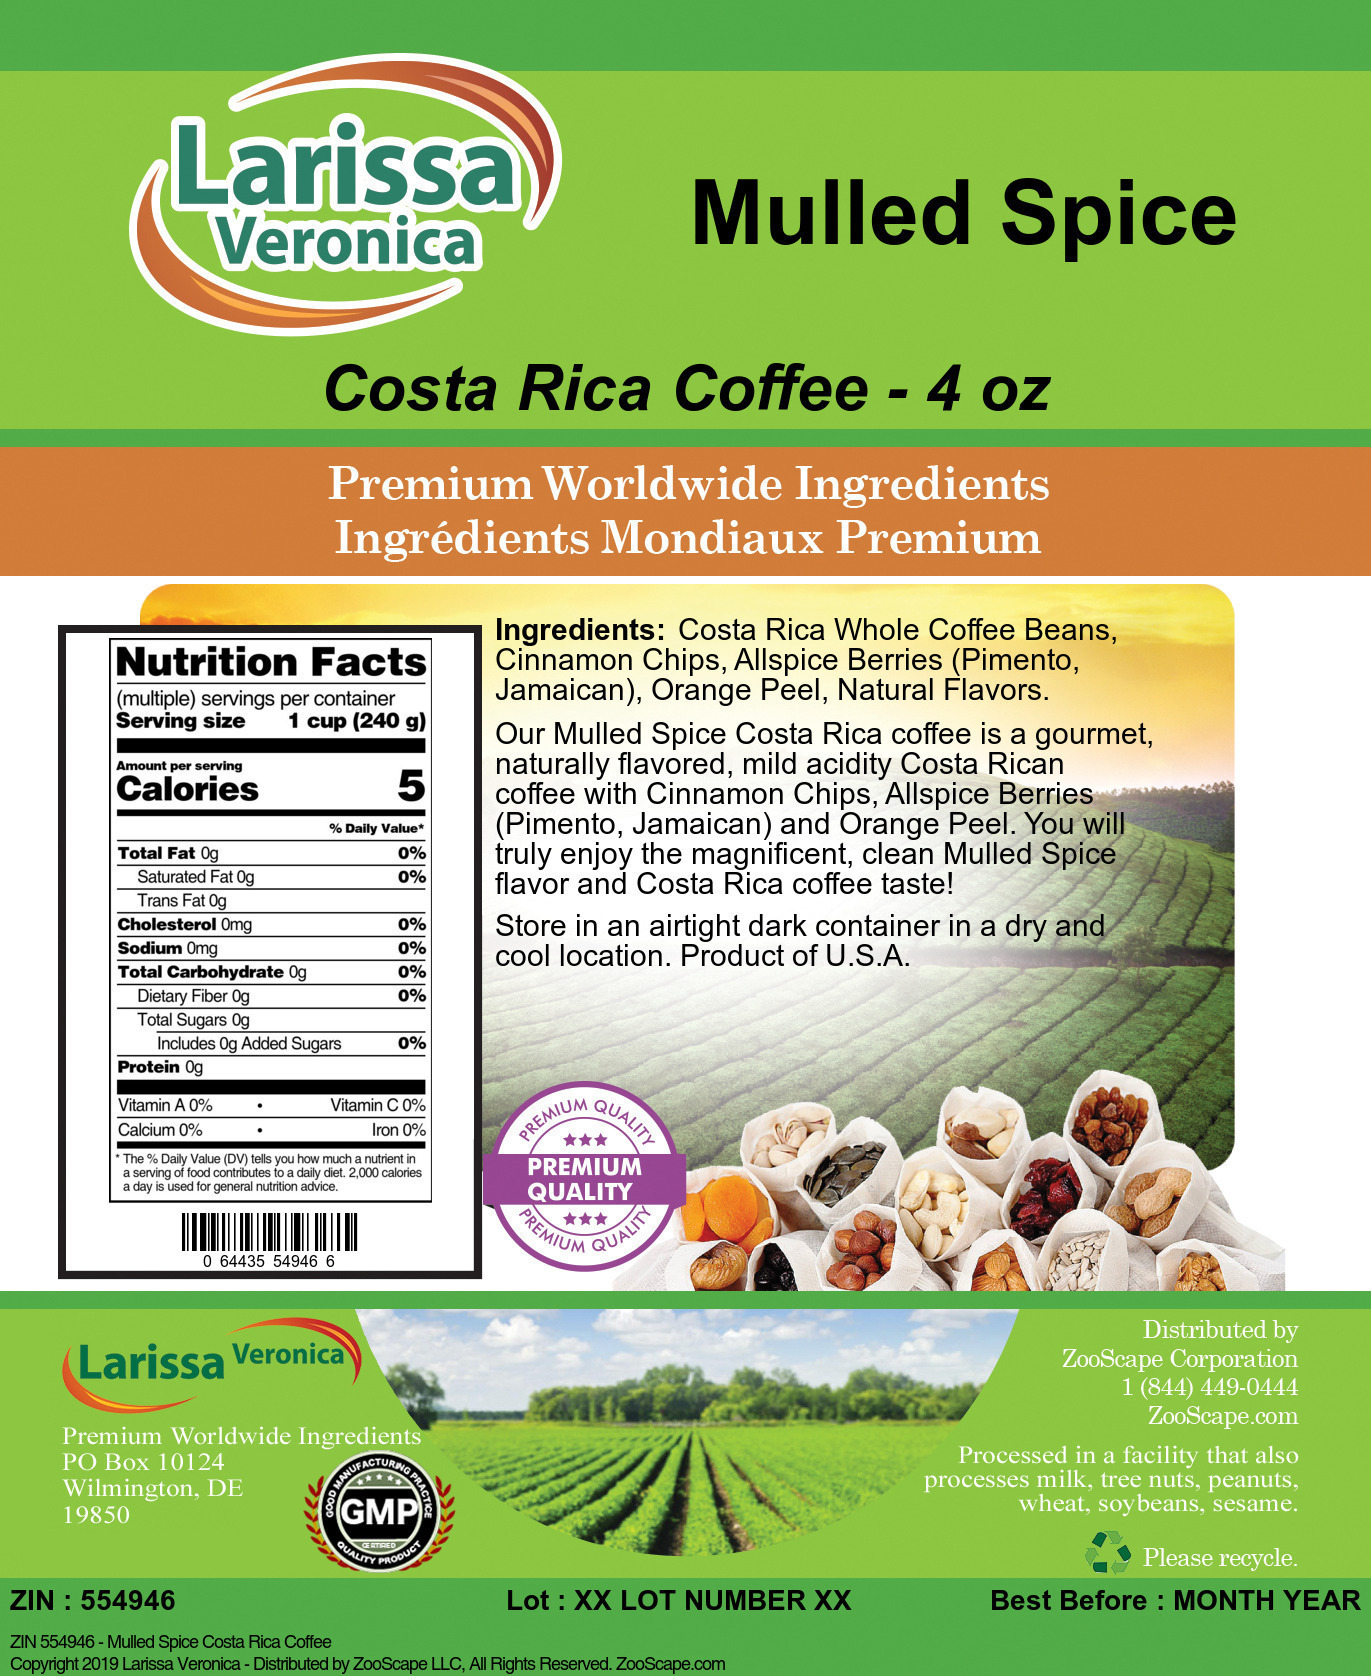 Mulled Spice Costa Rica Coffee - Label